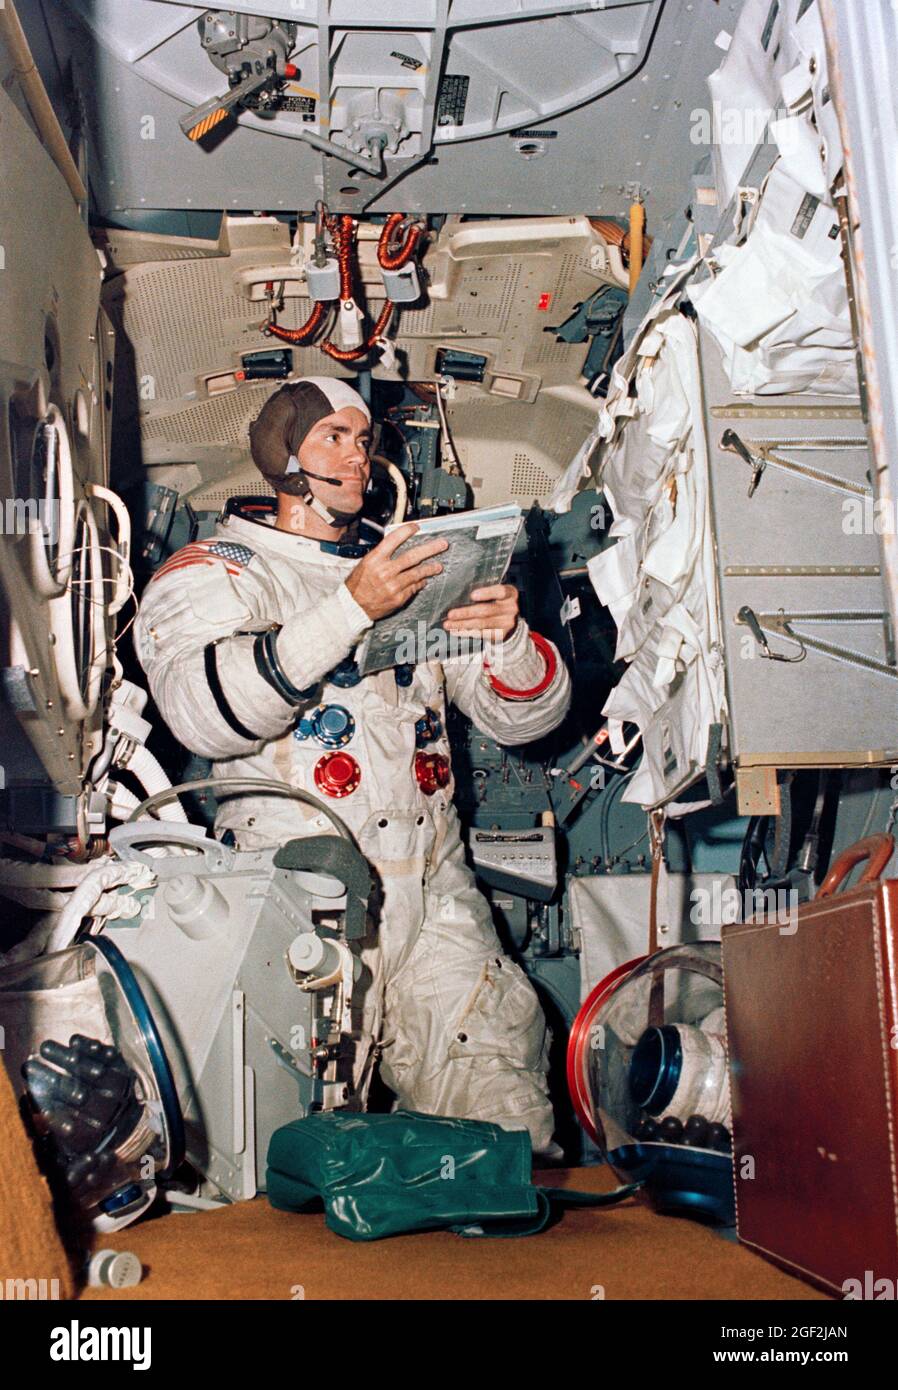 (4 April 1970) --- Astronaut Fred W. Haise Jr., Apollo 13 lunar module pilot, participates in simulation training in preparation for the scheduled lunar landing mission. He is in the Apollo Lunar Module Mission Simulator in the Kennedy Space Center's Flight Crew Training building. Stock Photo